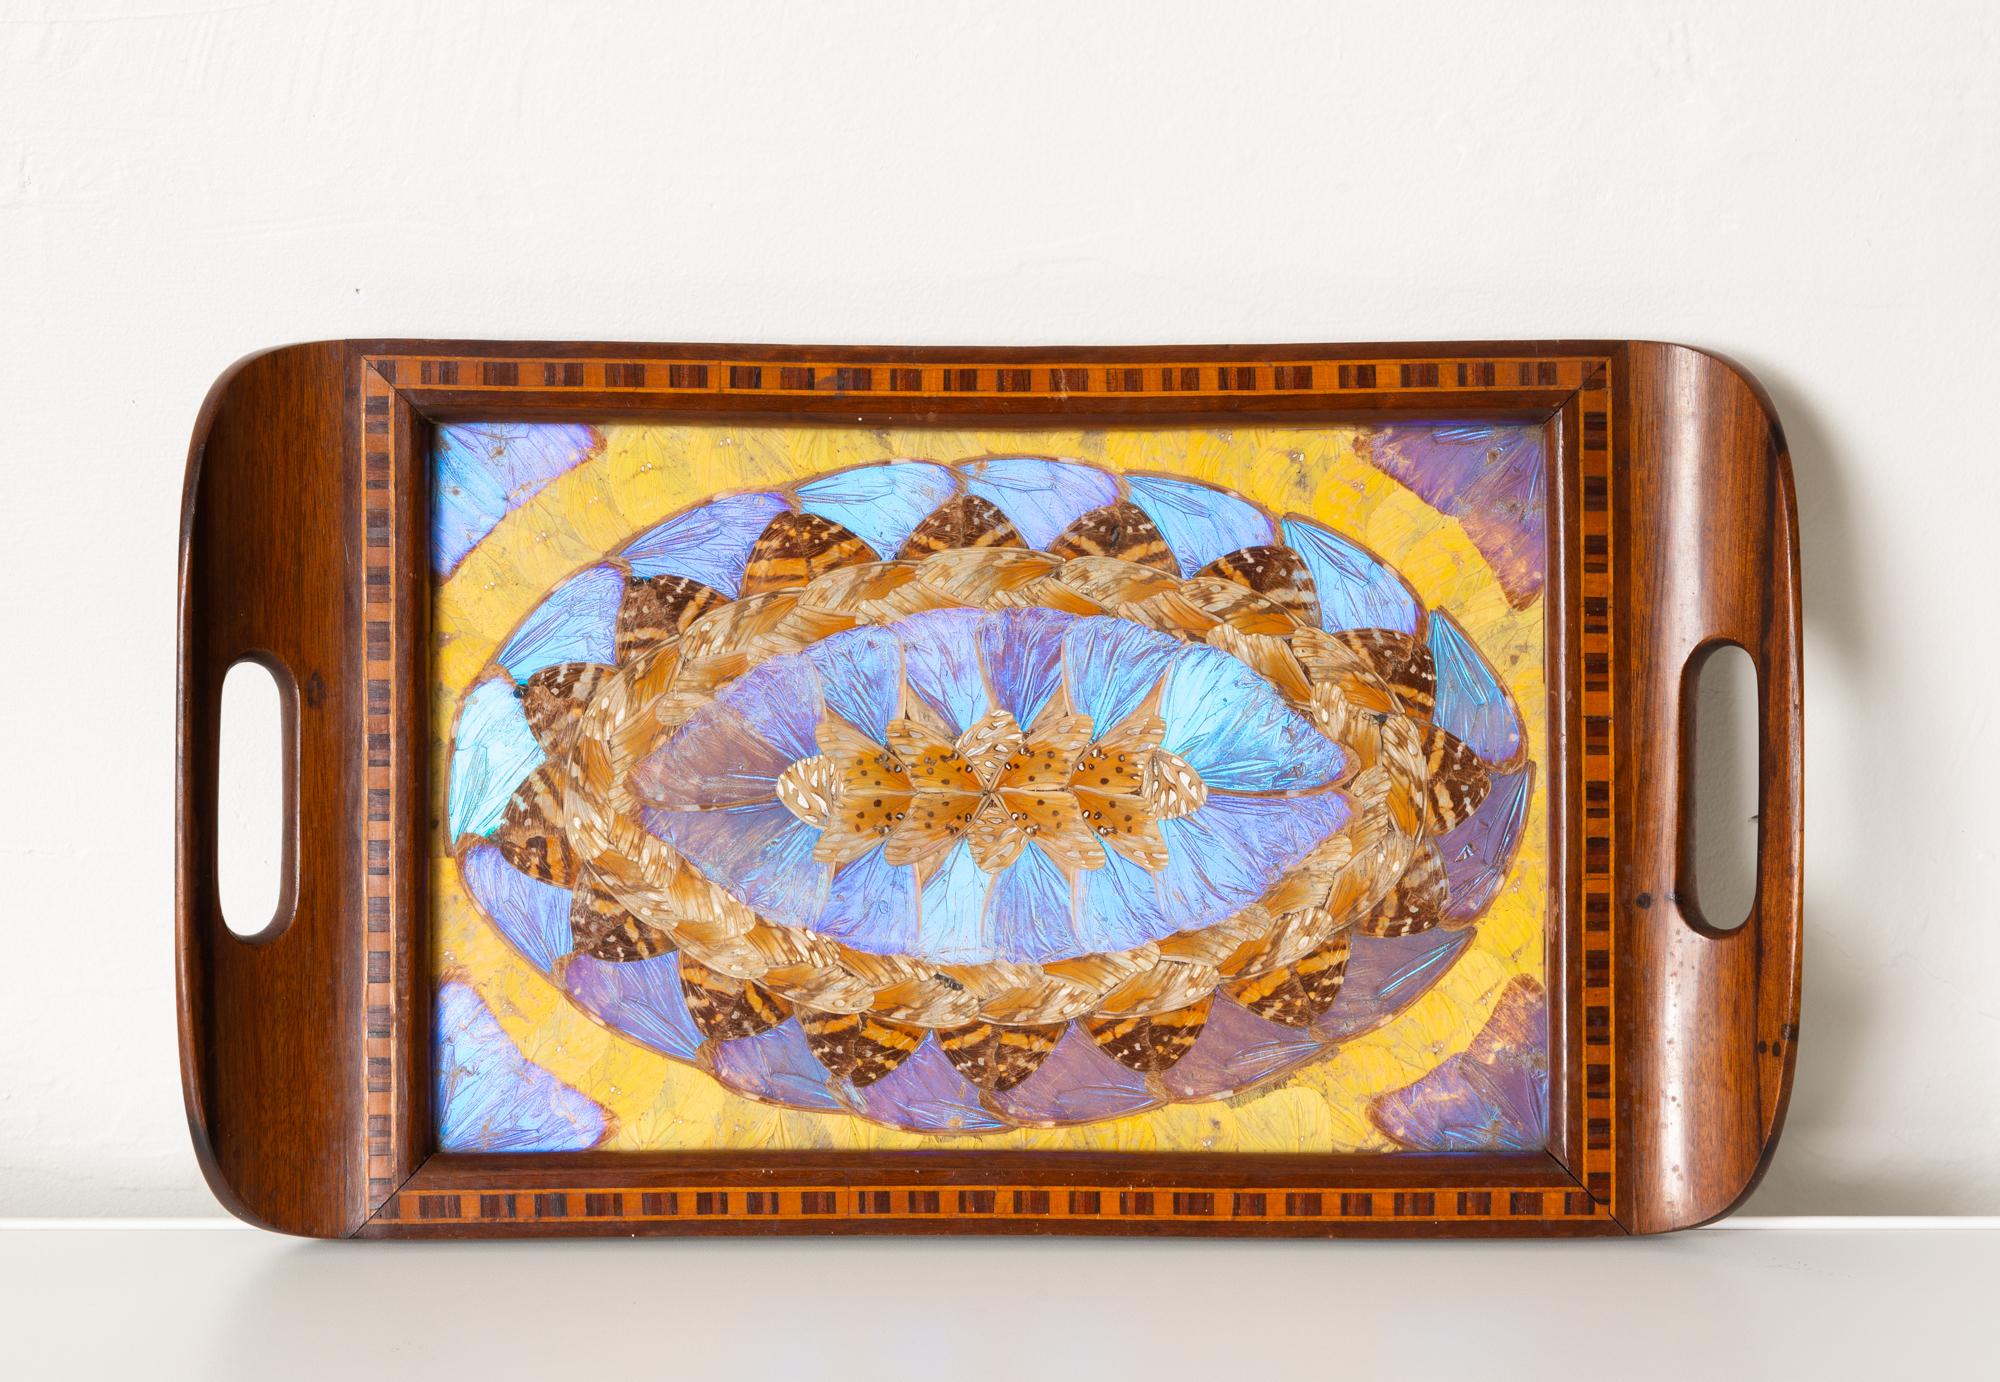 Inlaid butterfly wing serving tray by Formanek, Brazil, circa 1950s. Featuring a stunning vibrant display of butterfly wings underneath a protective piece of glass, when the light hits the iridescent surface of the wings, this piece is truly